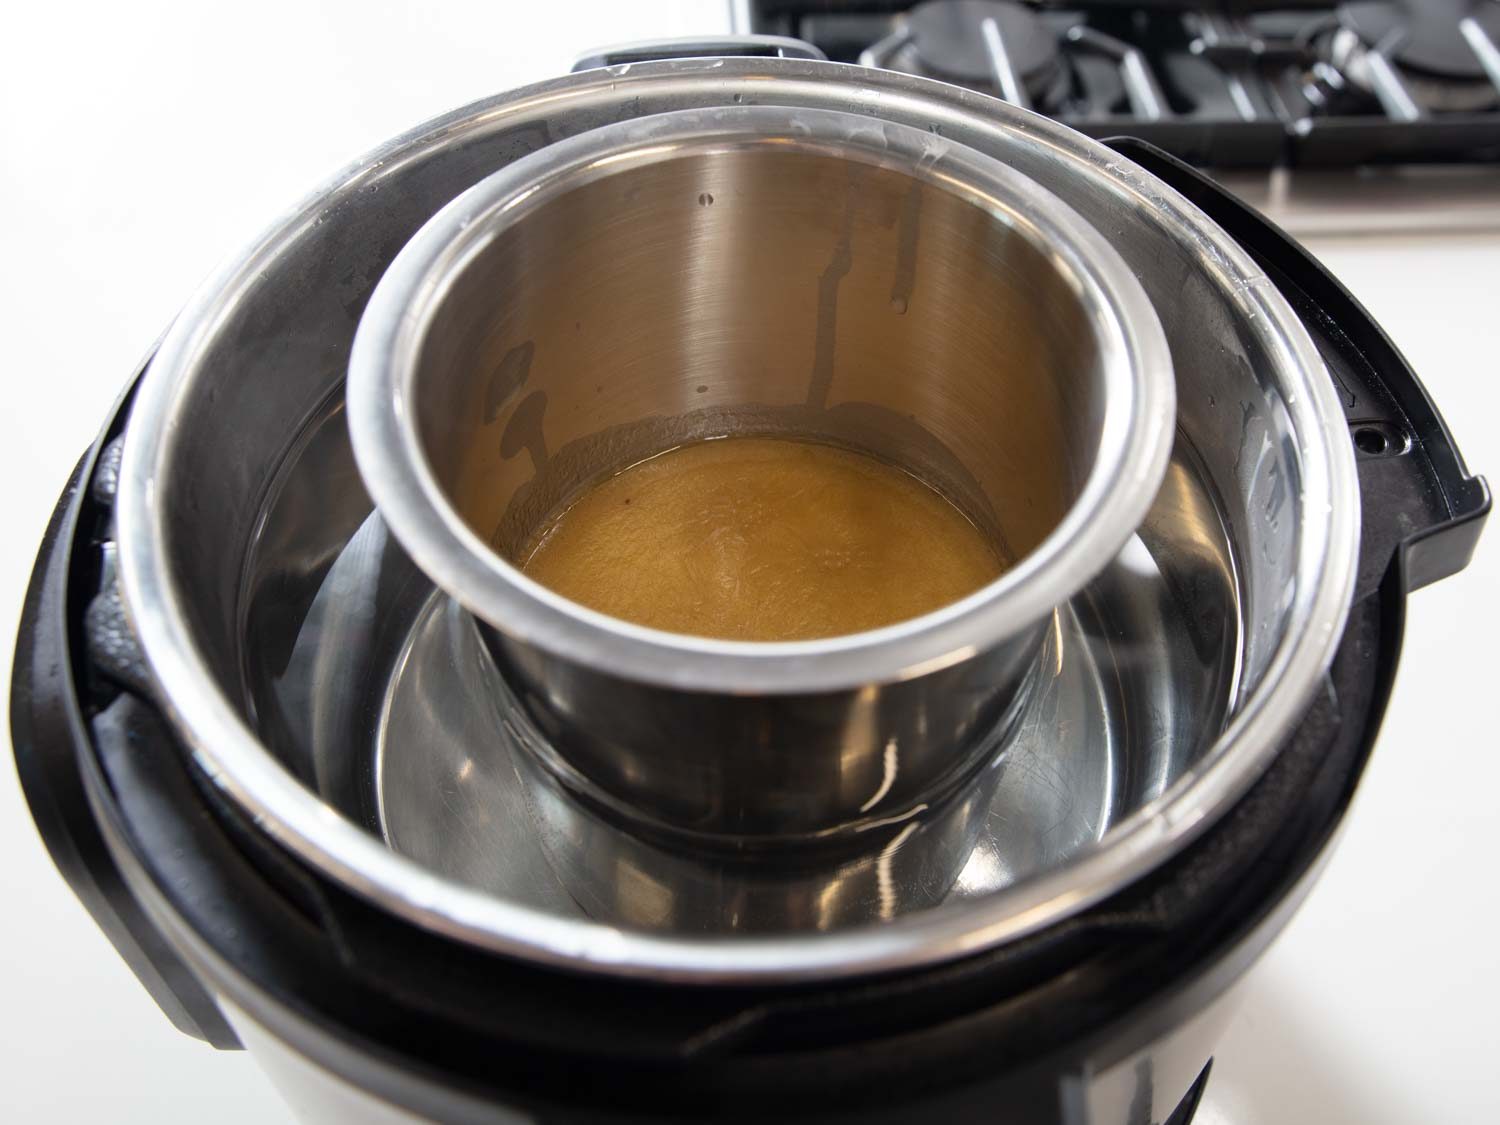 Here, a metal container holding gravy is sitting in a hot-water bath created using a multi-cooker set on its slow-cooker setting